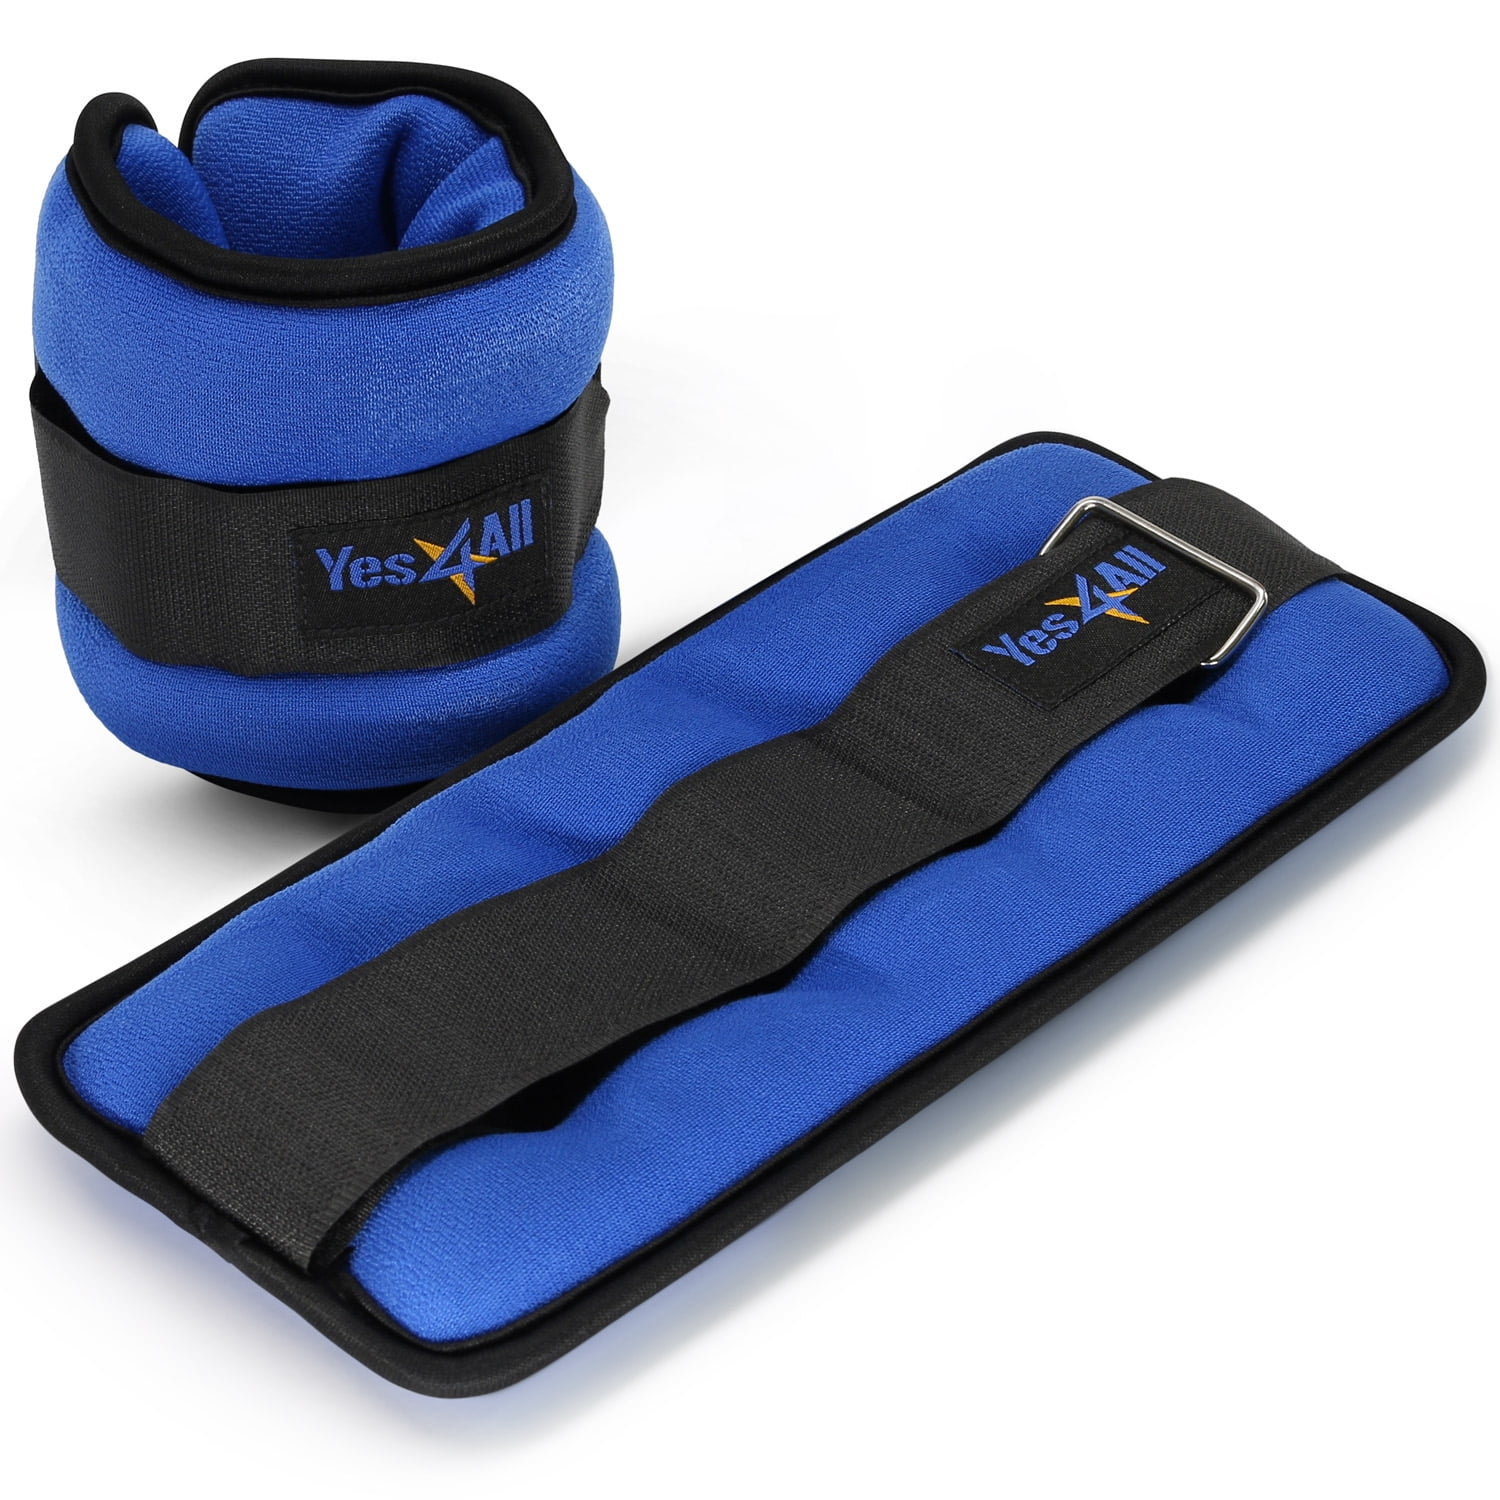 HIGH QUALITY Details about   Set Of 2 CAP 2Ib Training Ankle\Wrist Weights Water Workouts Blue 